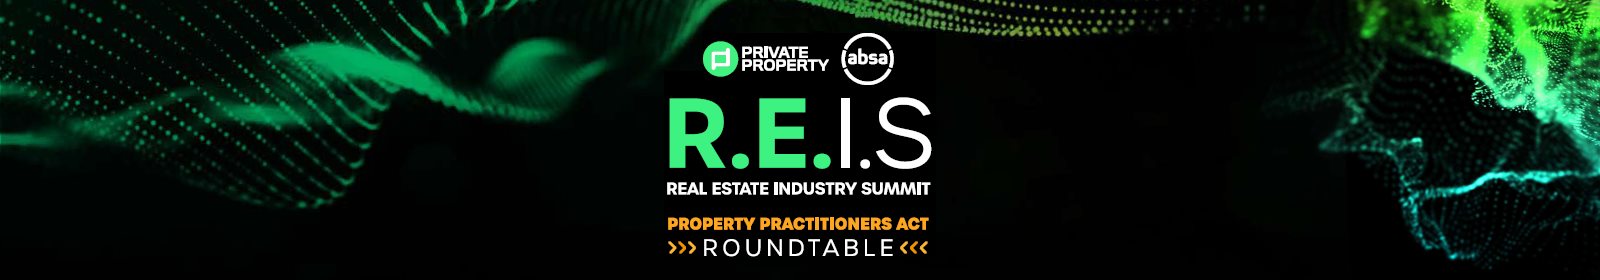 Private property brings you the real estate industry summit